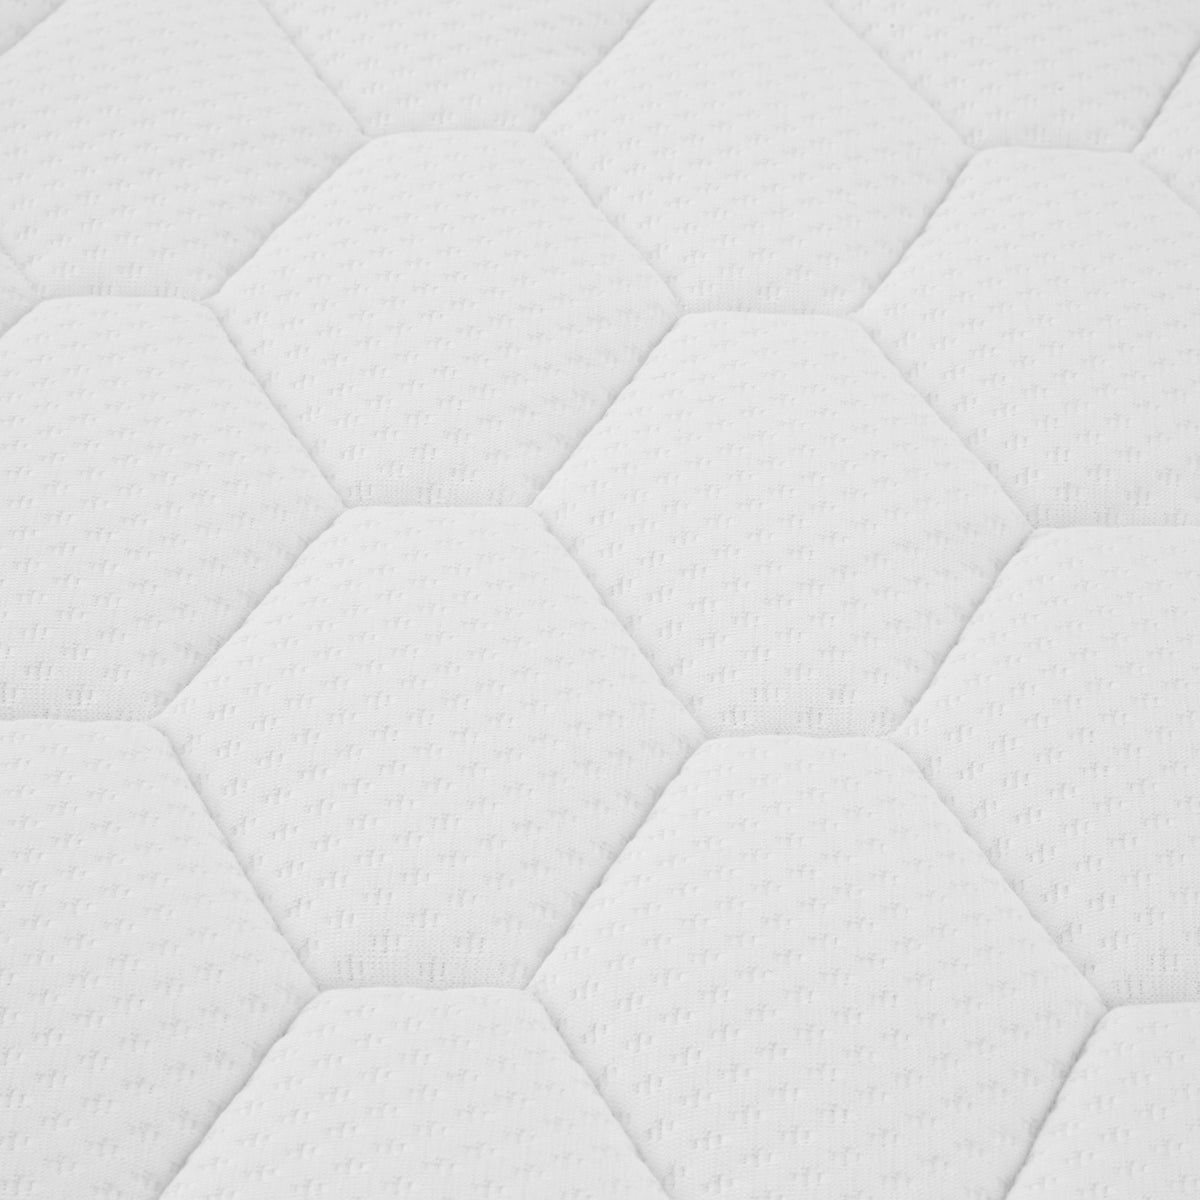 Roseland Sleep Classic Pocket Sprung Memory Foam Quilted Mattress hexagon patterned quilted top